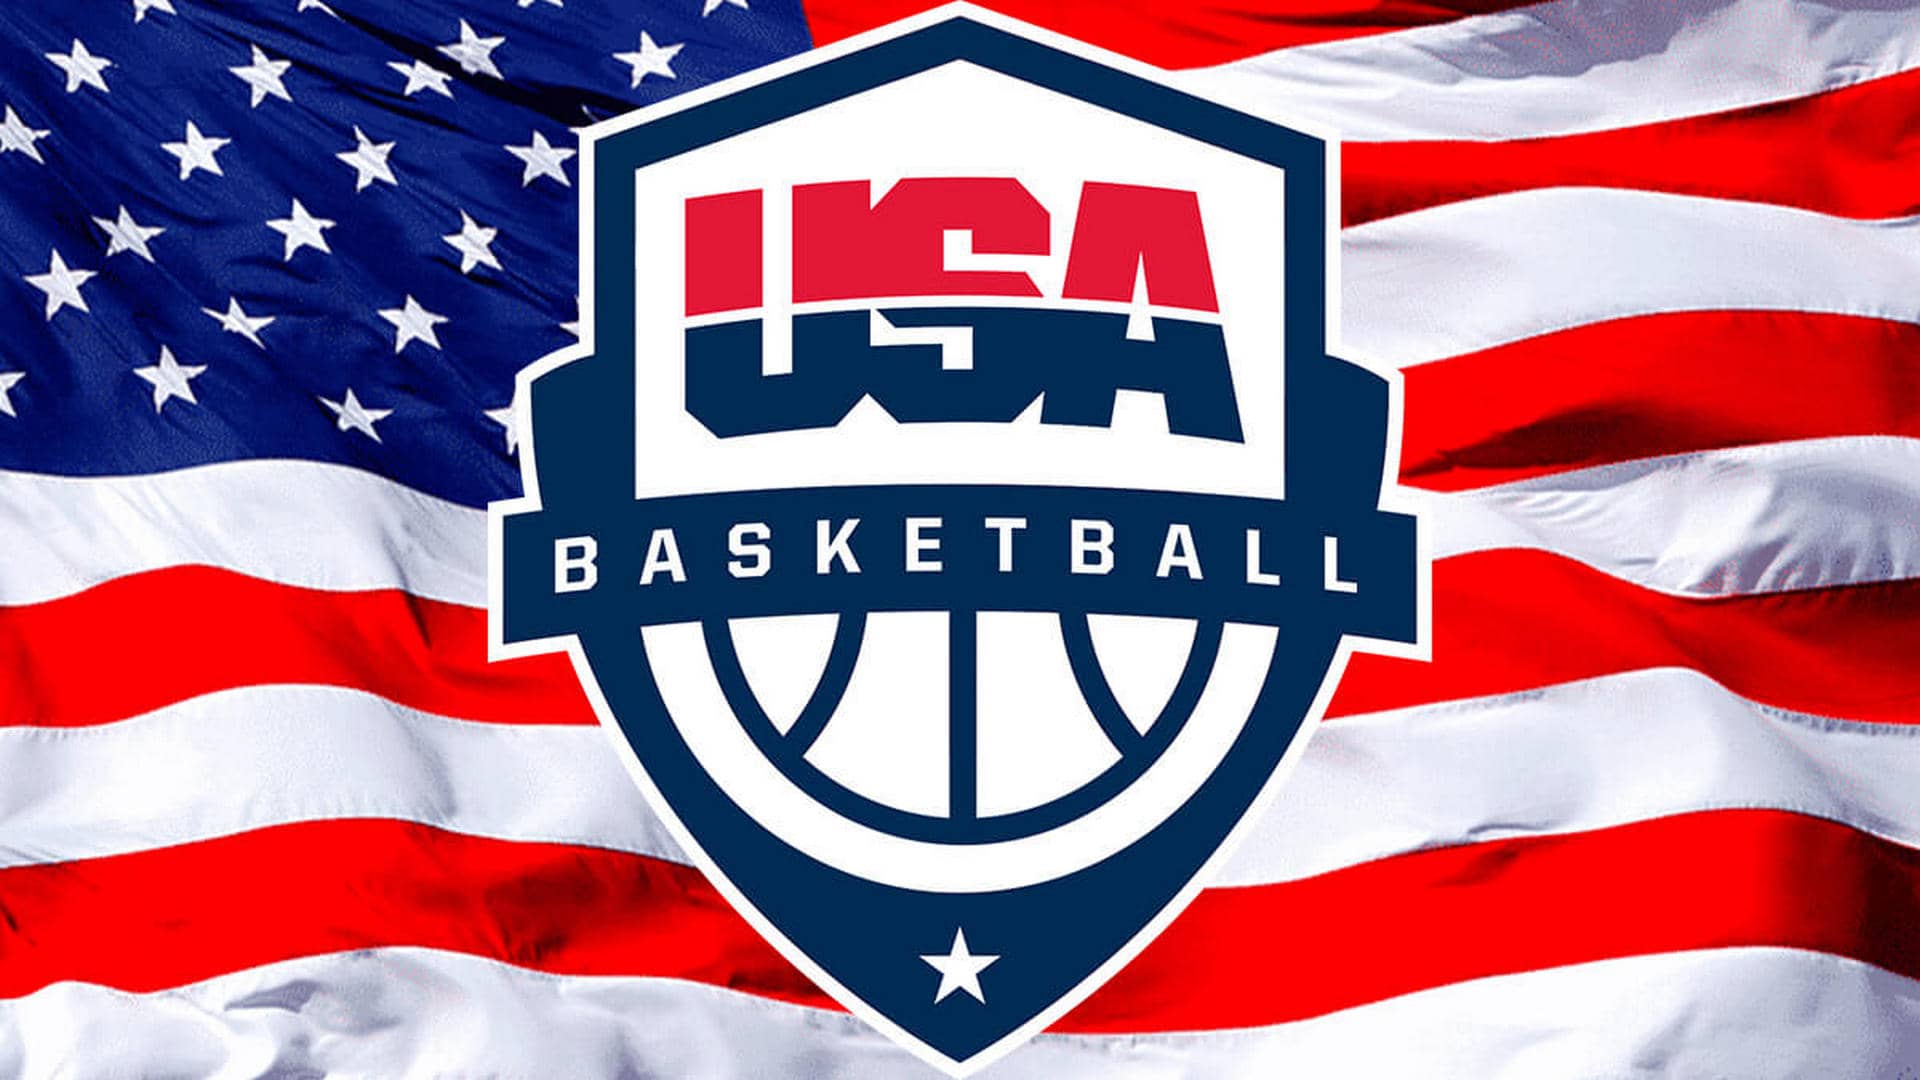 USA - Best basketball teams in the world